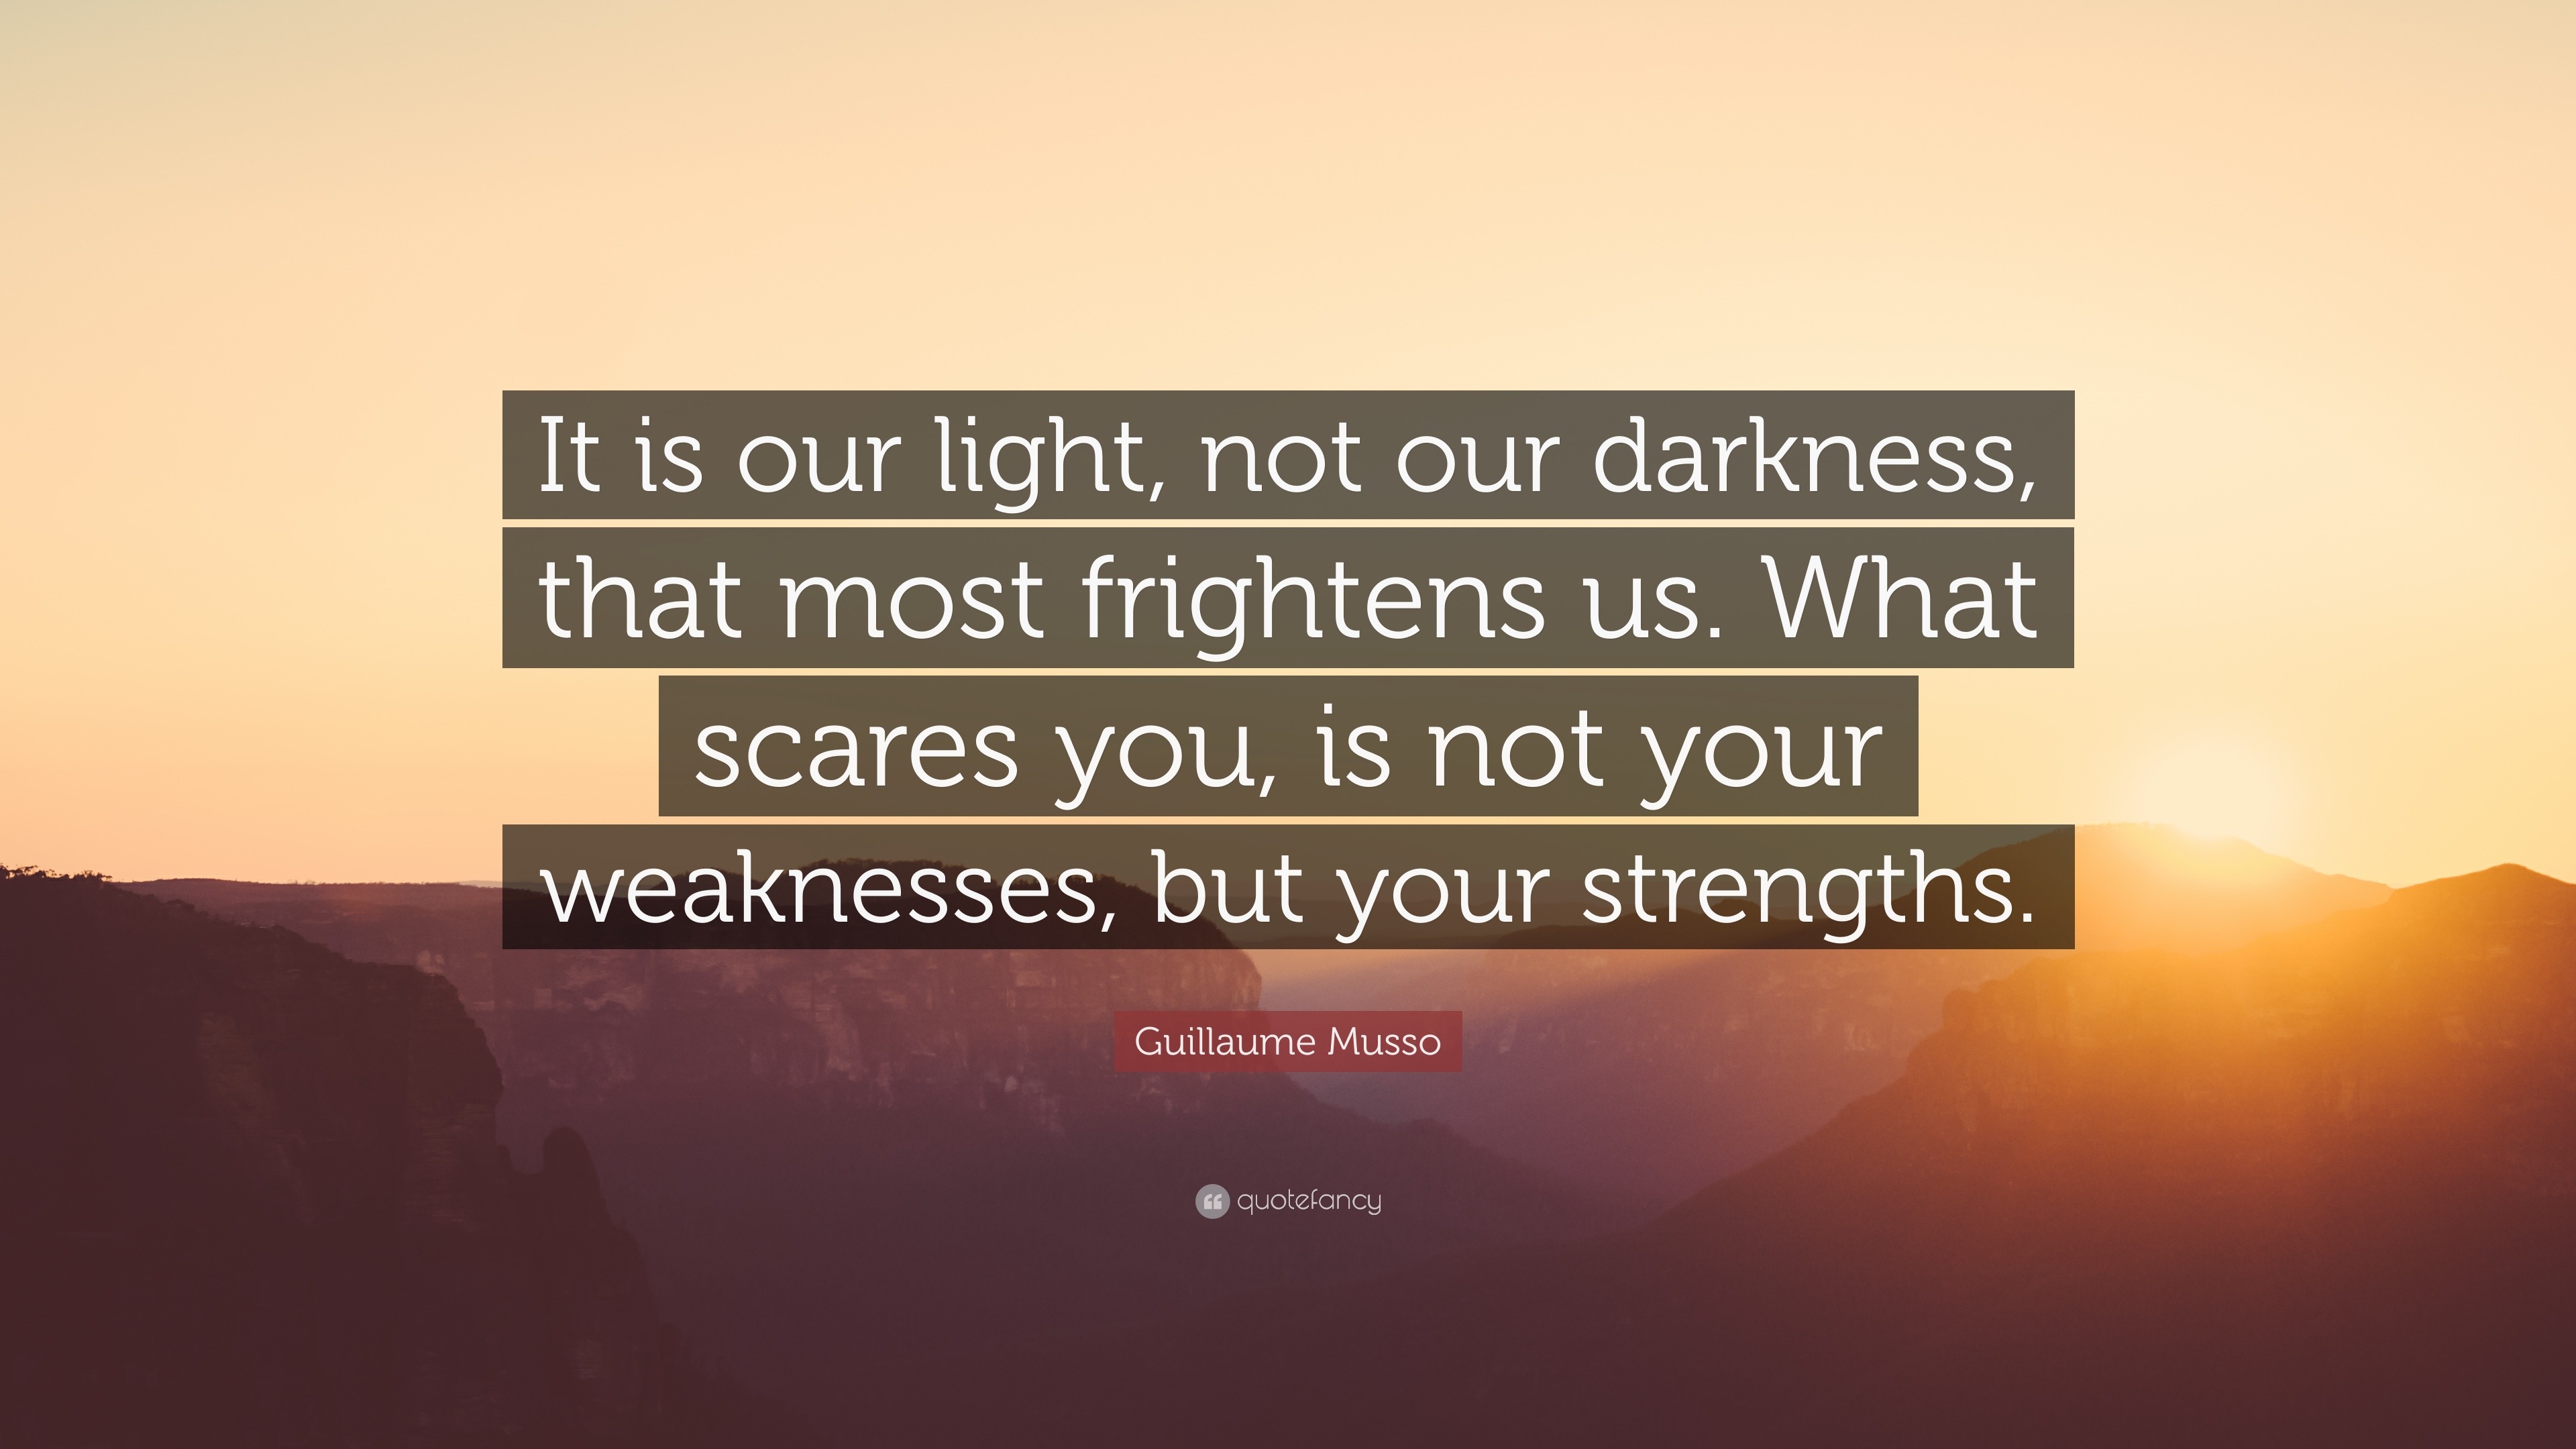 Guillaume Quote: “It is our light, not our darkness, that frightens us. What scares